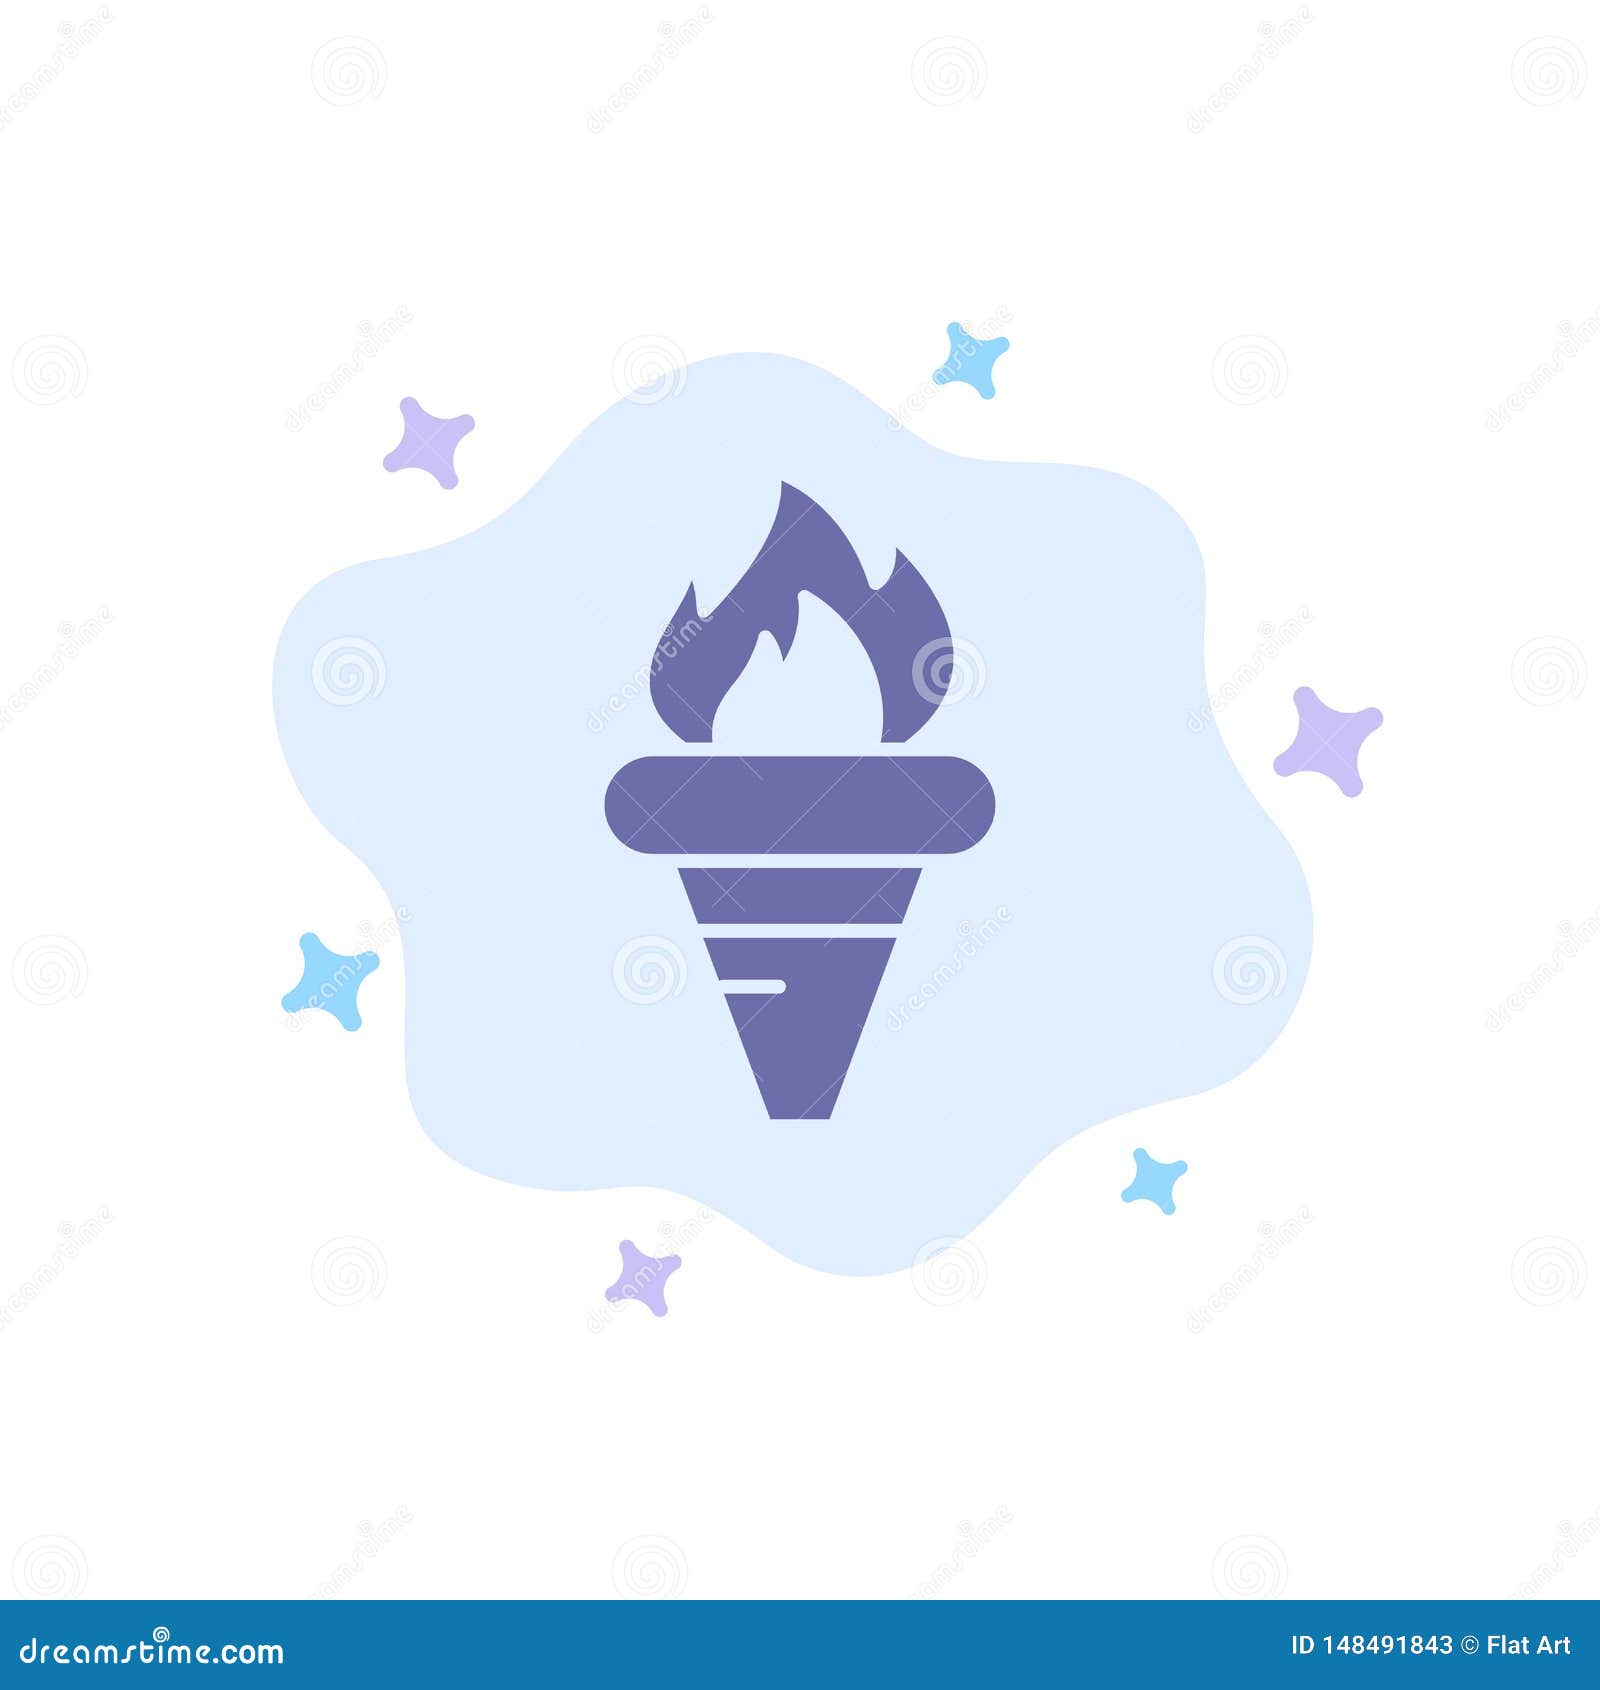 flame, games, greece, holding, olympic blue icon on abstract cloud background